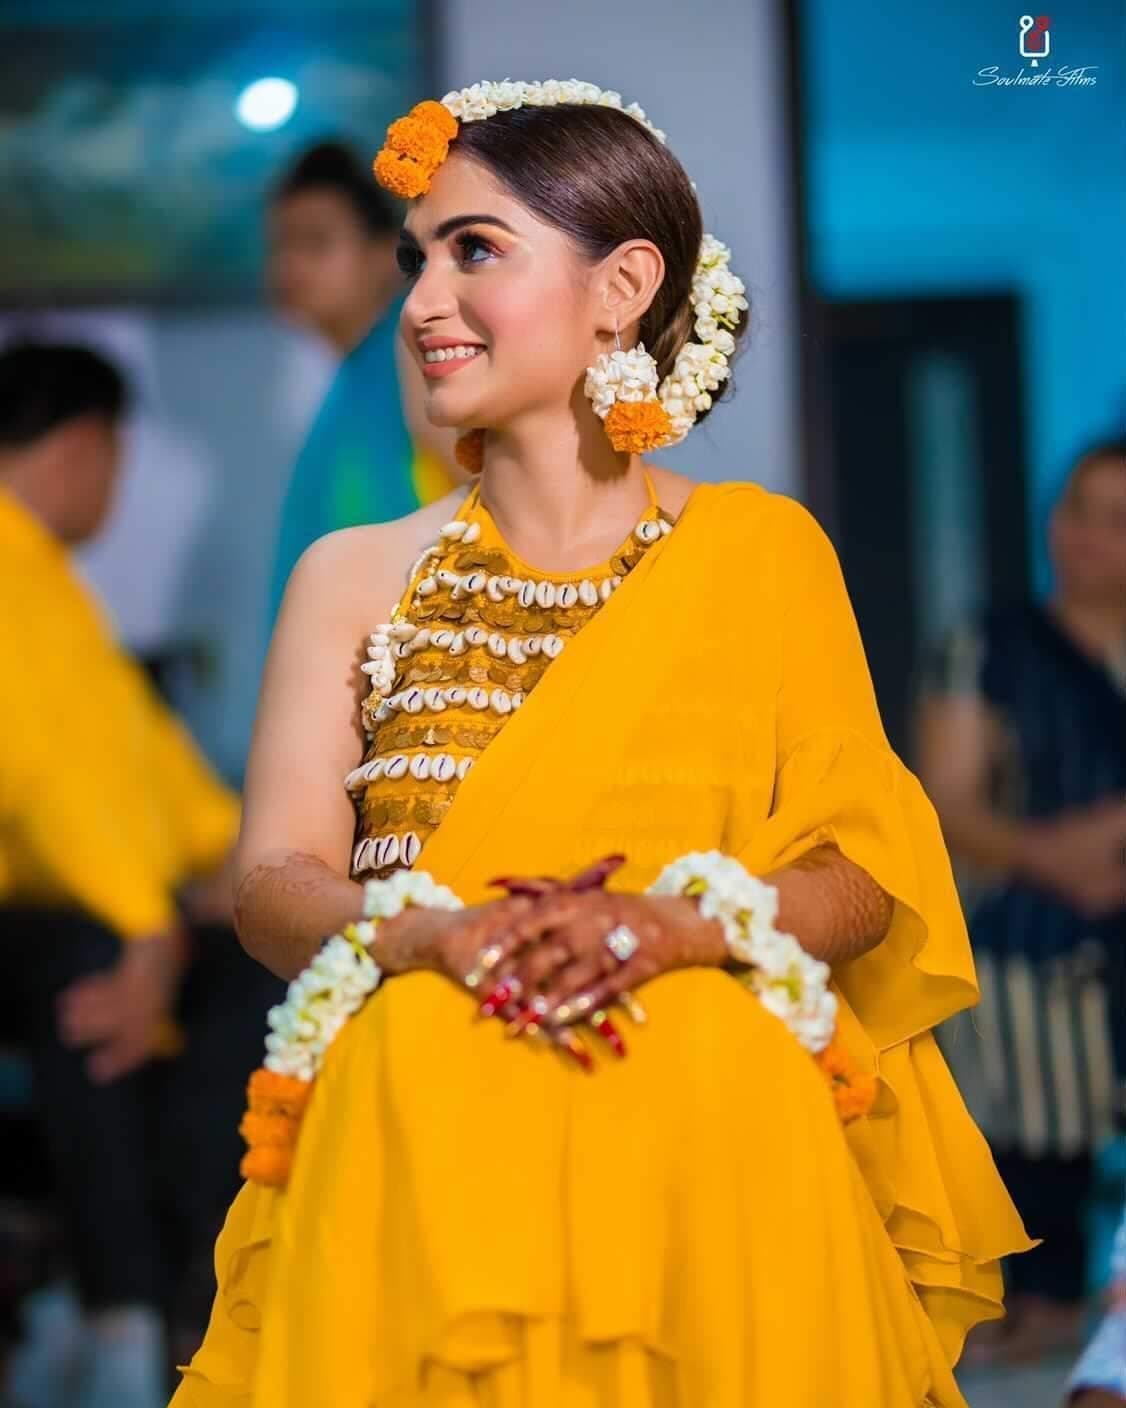 haldi bride in simple yellow saree and shell blouse